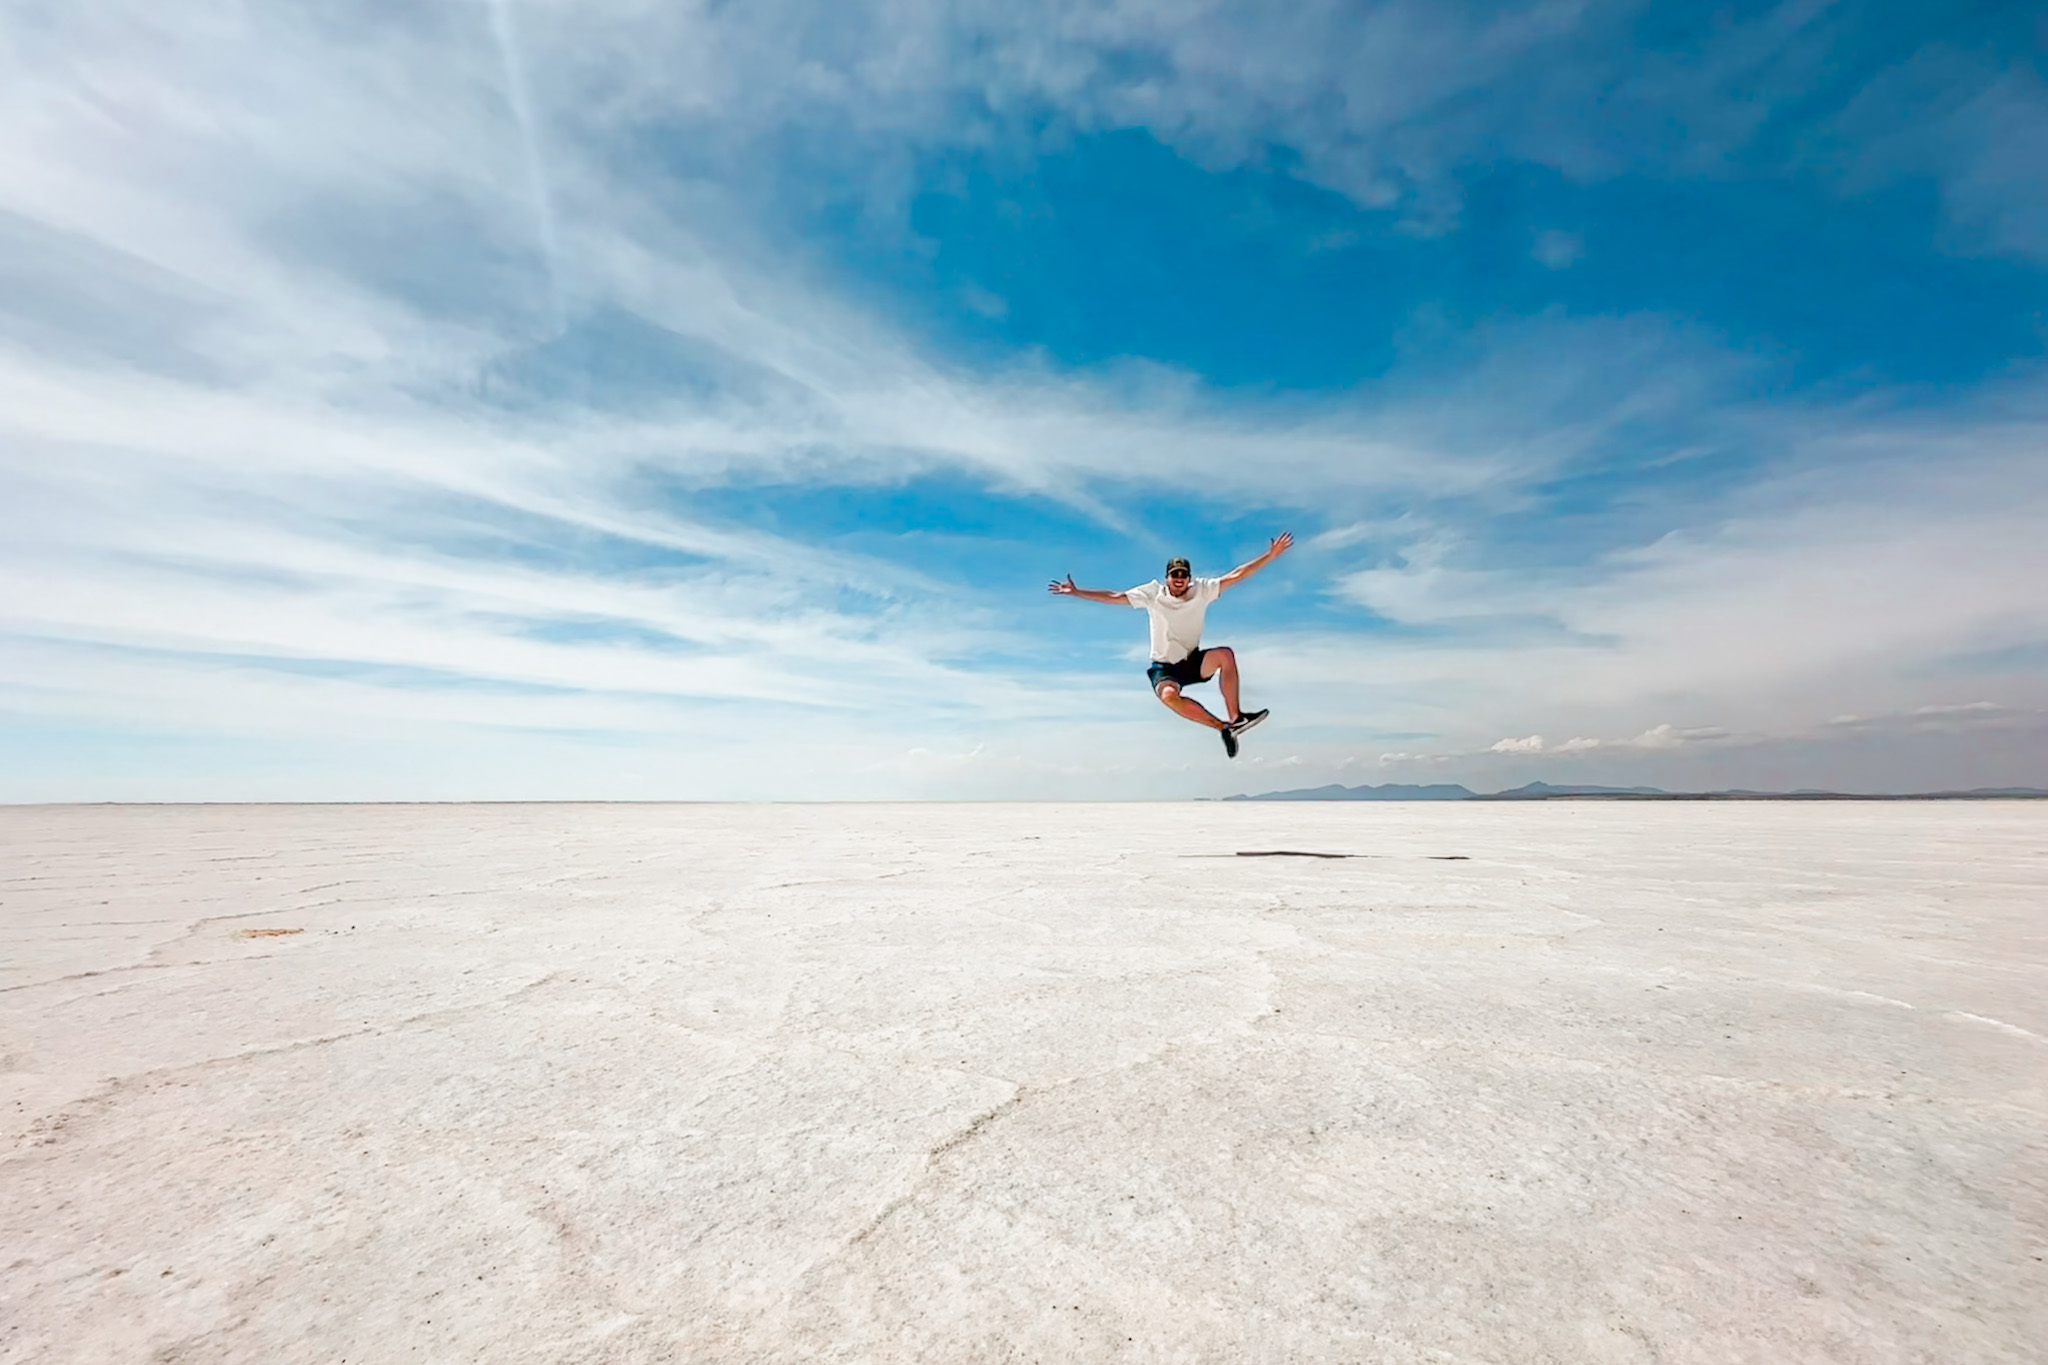 Uyuni Travel Guide: Jumping in the air in the largest salt flat in the world